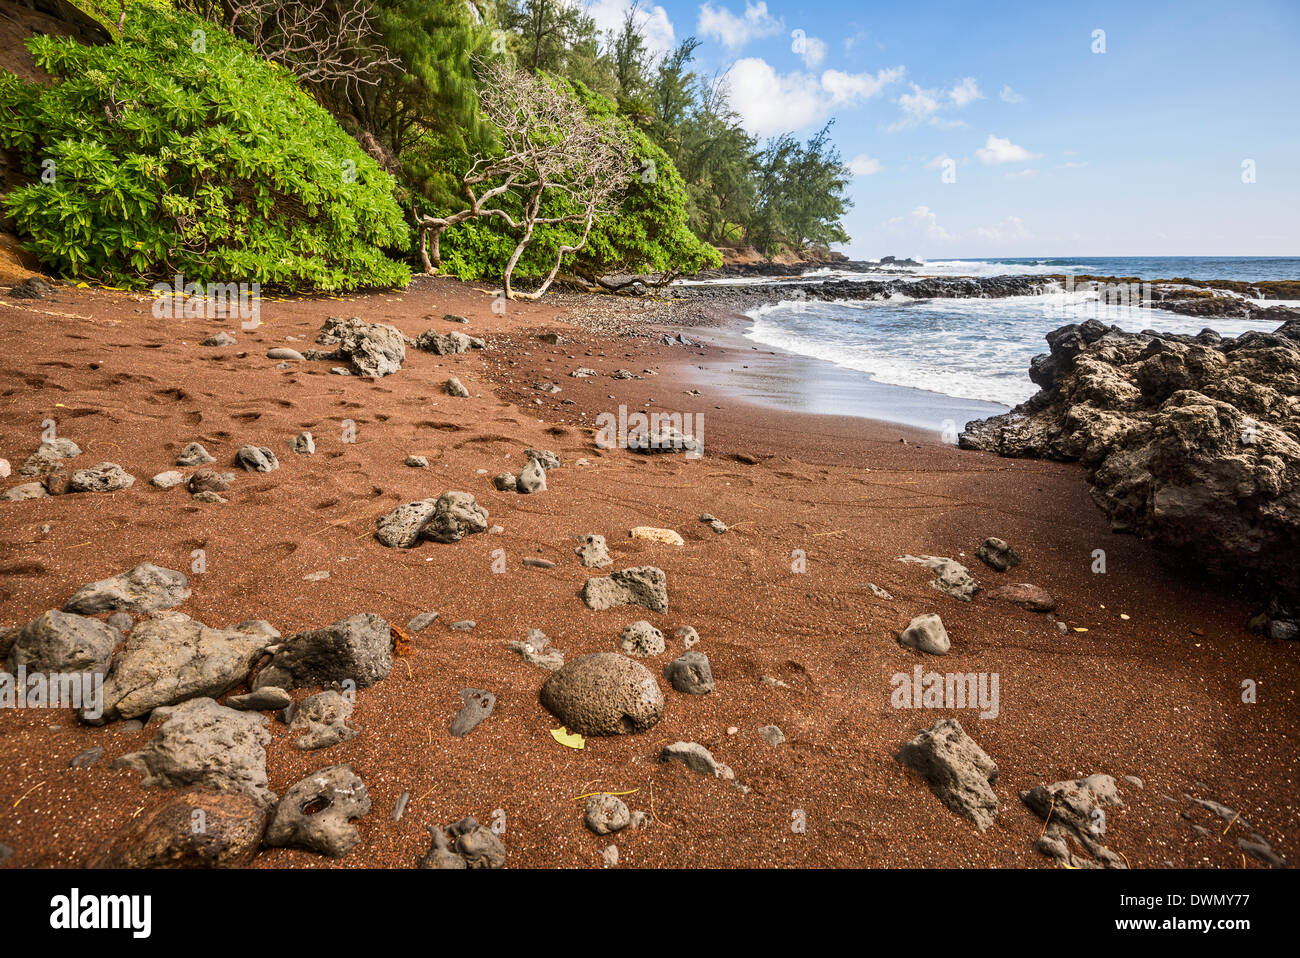 The exotic and stunning Red Sand Beach on the Hawaiian Island of Maui. Stock Photo